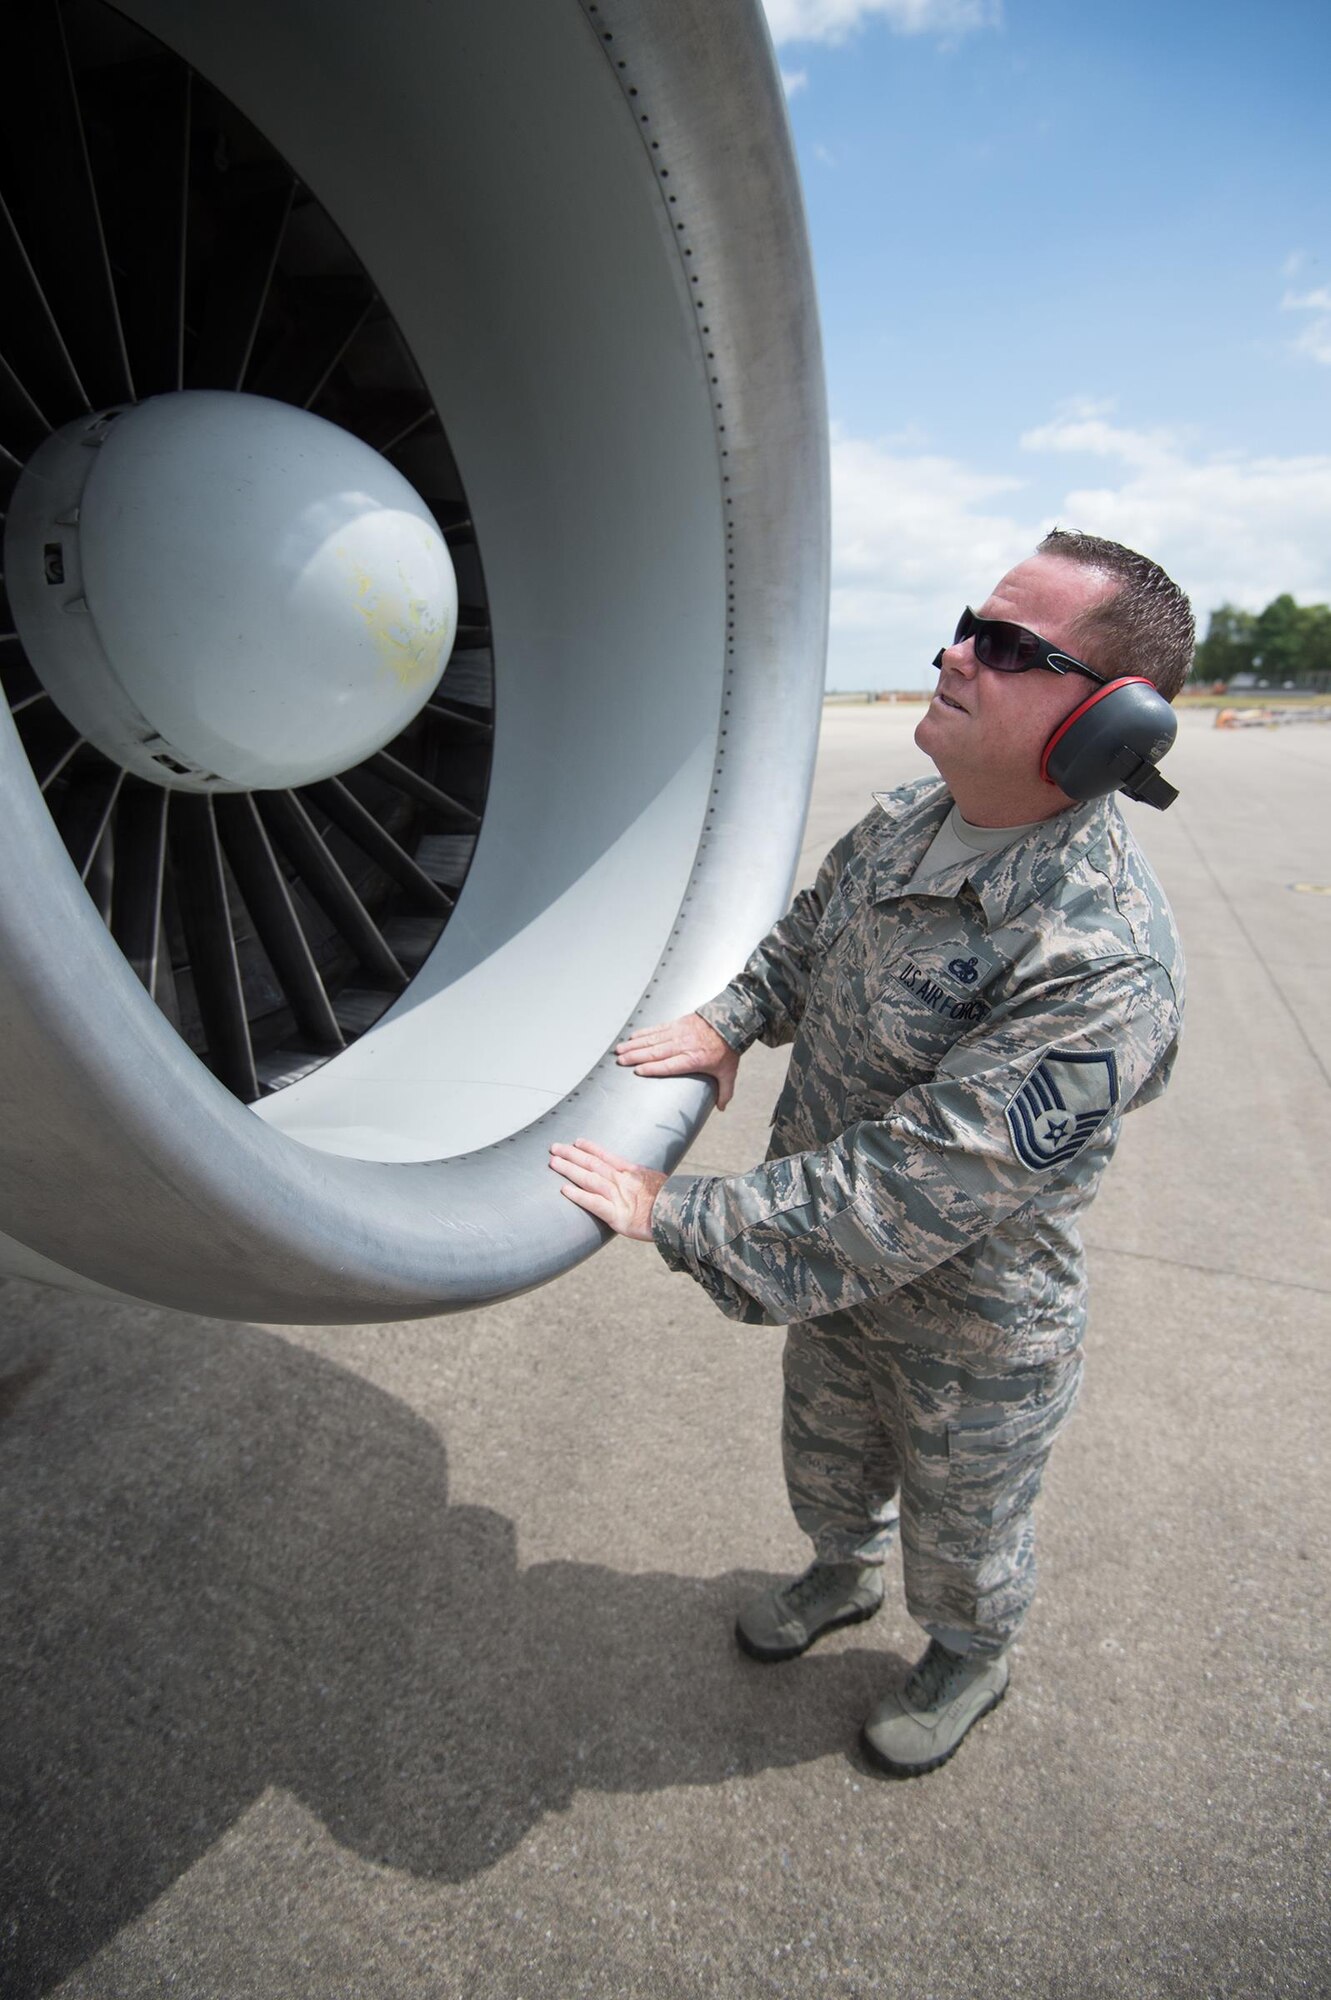 Master Sgt. Brian Finley, a jet engine specialist assigned to the 513th Maintenance Squadron, performs an inspection of an E-3 Sentry engine on June 12, 2017, prior to a mission supporting the BALTOPS 2017 exercise at NATO Air Base Geilenkirchen, Germany. The E-3 Sentry and nearly 100 Reservists from the 513th Air Control Group are deployed in support of BALTOPS 2017, which is the first time a U.S. E-3 Sentry has supported a NATO exercise in 20 years. (U.S. Air Force photo/2nd Lt. Caleb Wanzer)